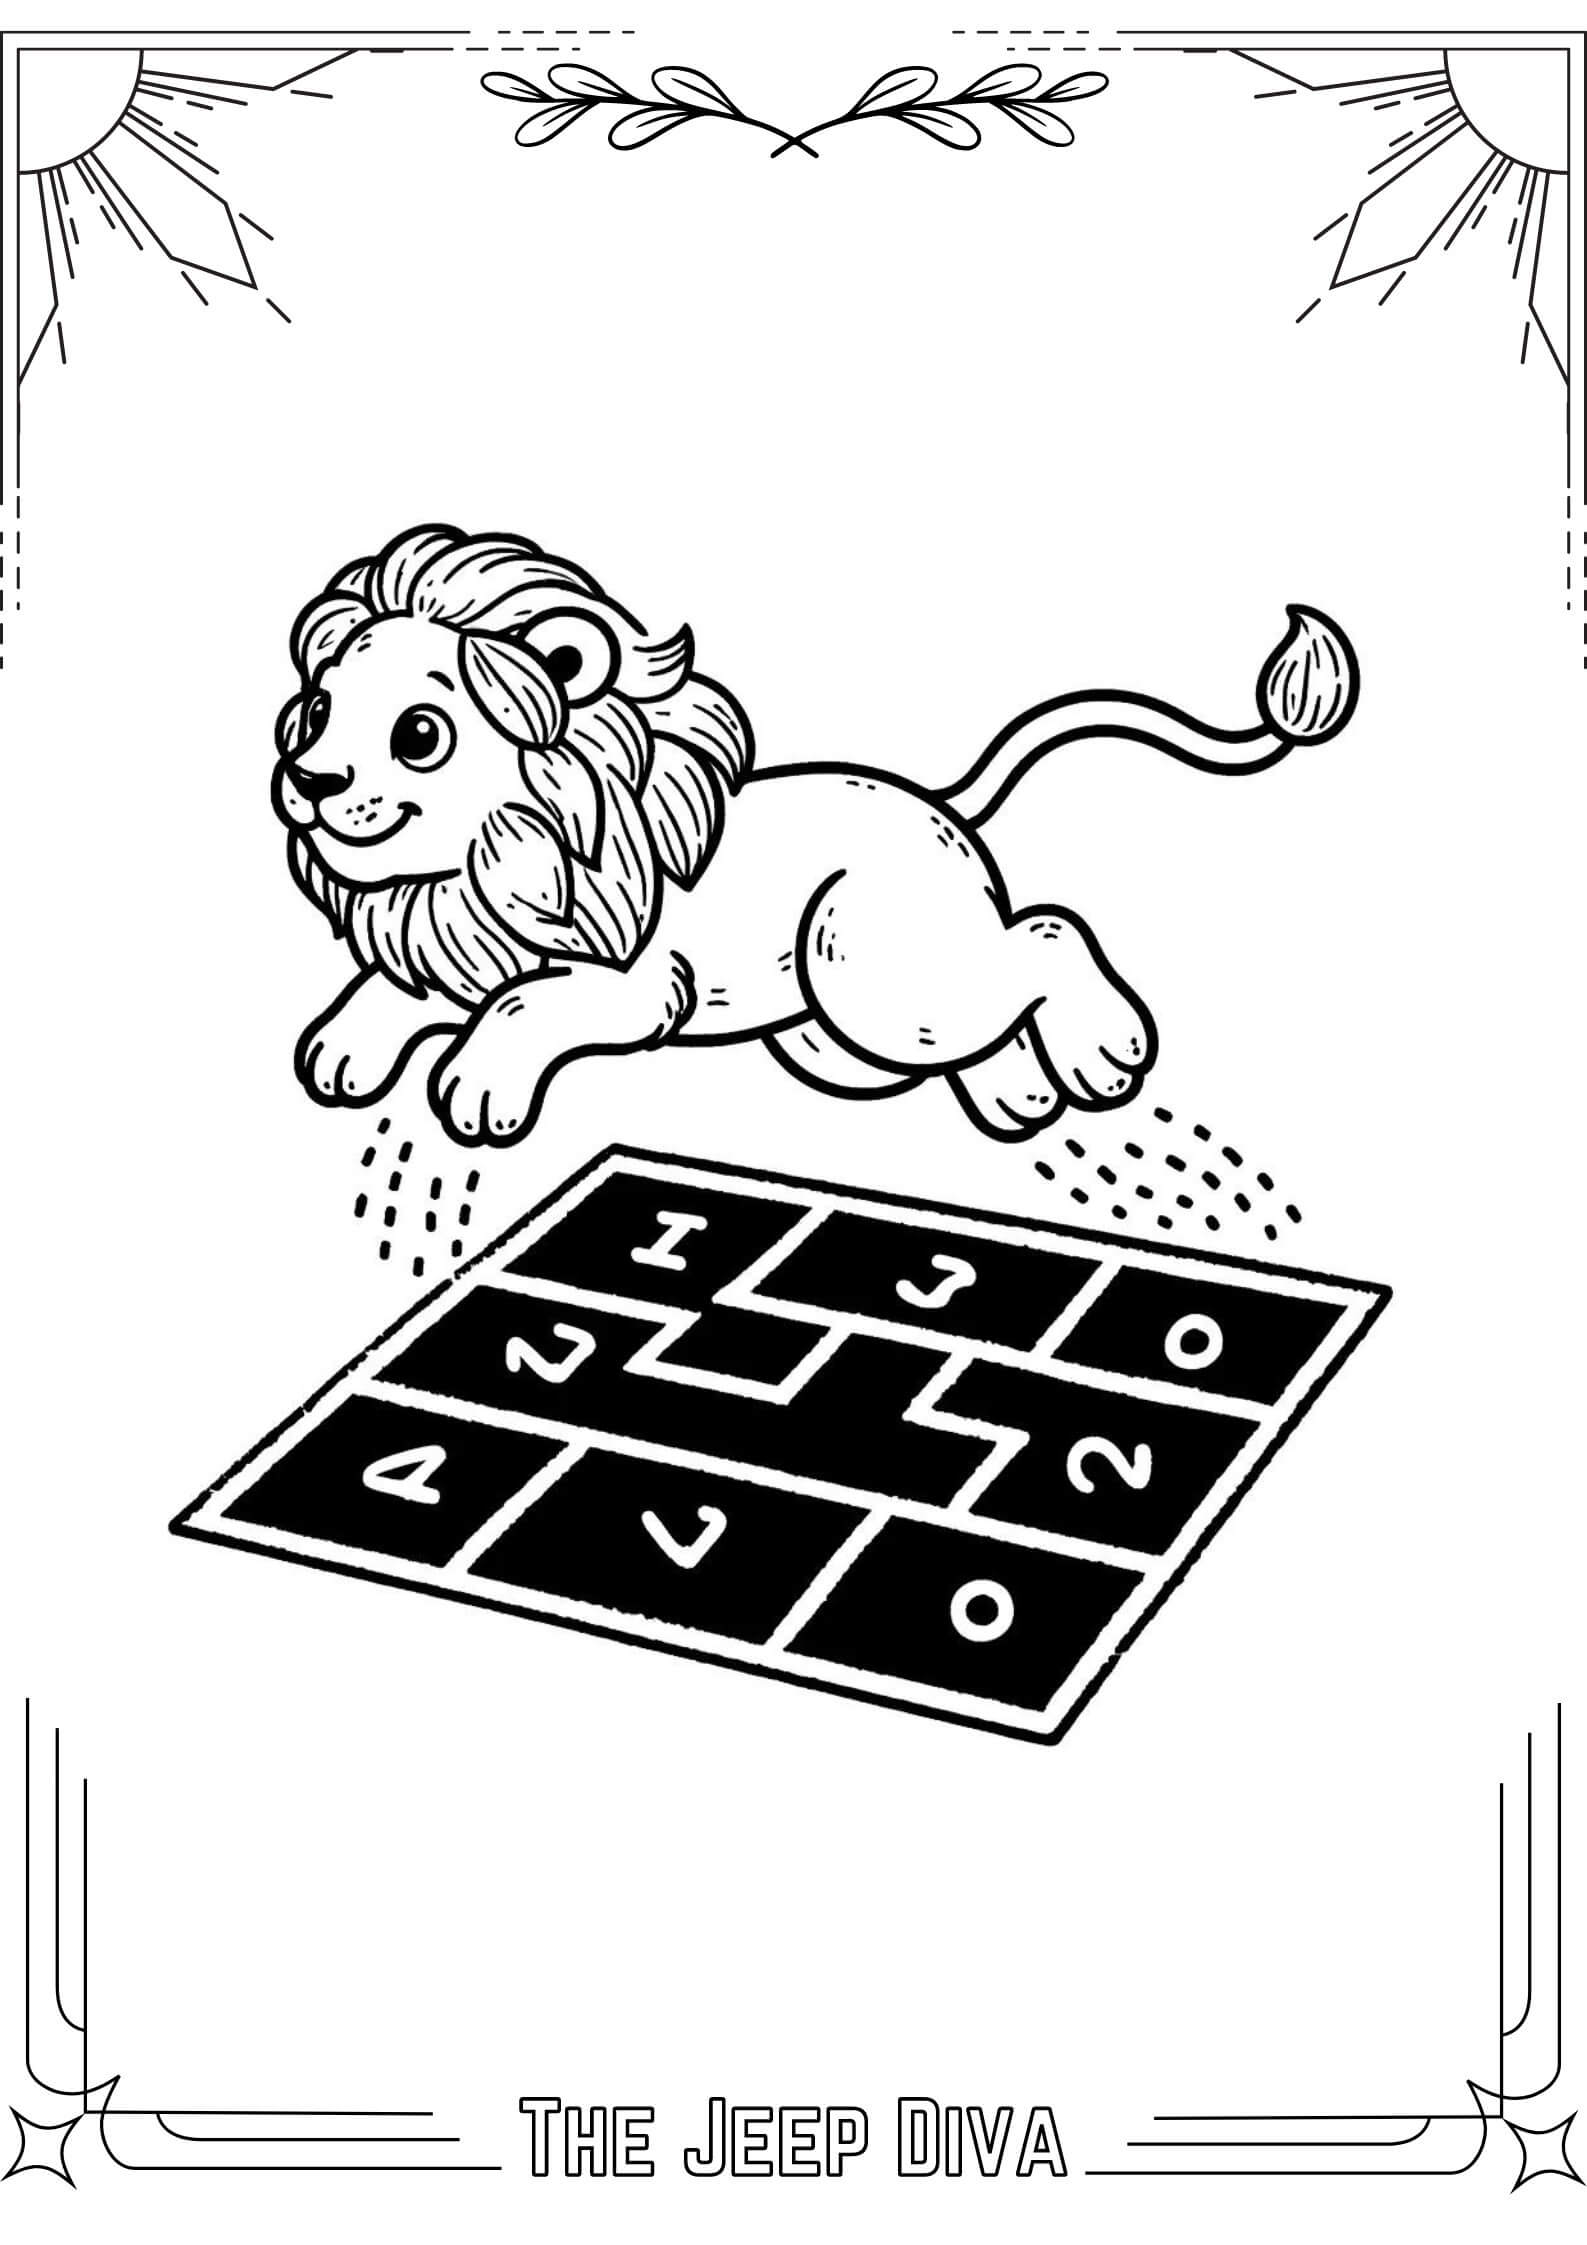 The Jeep Diva Coloring Page Lion Medium Difficulty 10